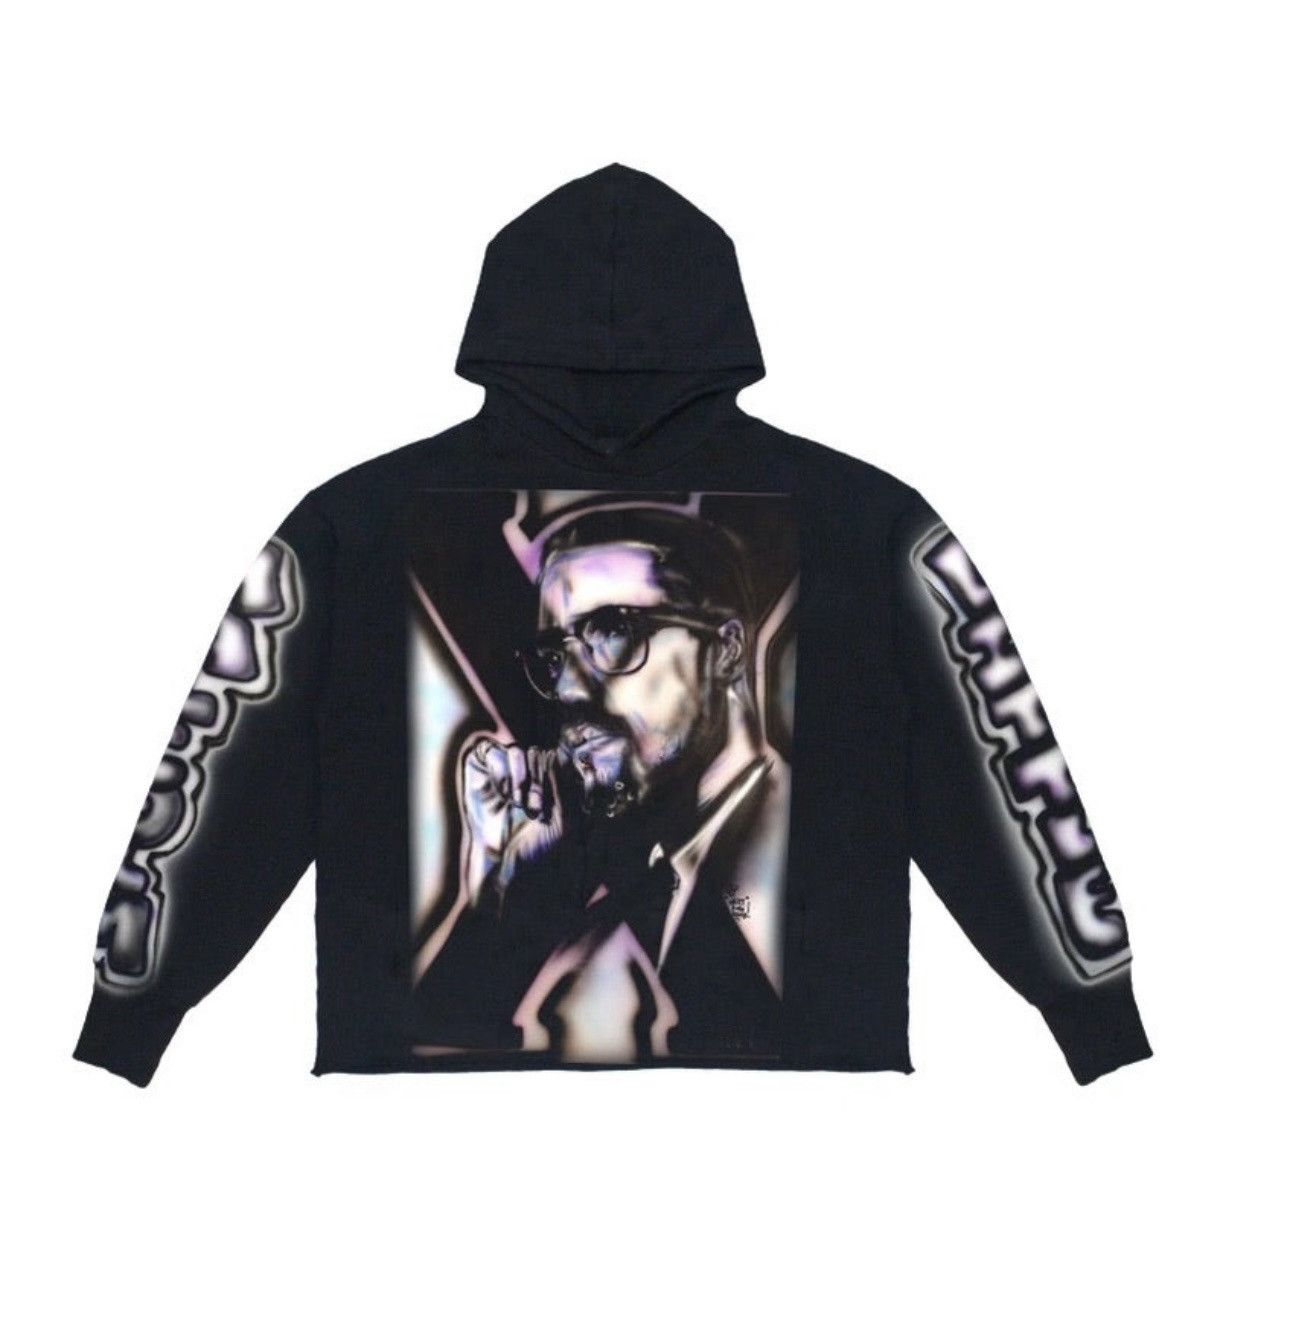 Barriers Barriers Limited Malcom X Hoodie Size US XL / EU 56 / 4 - 1 Preview